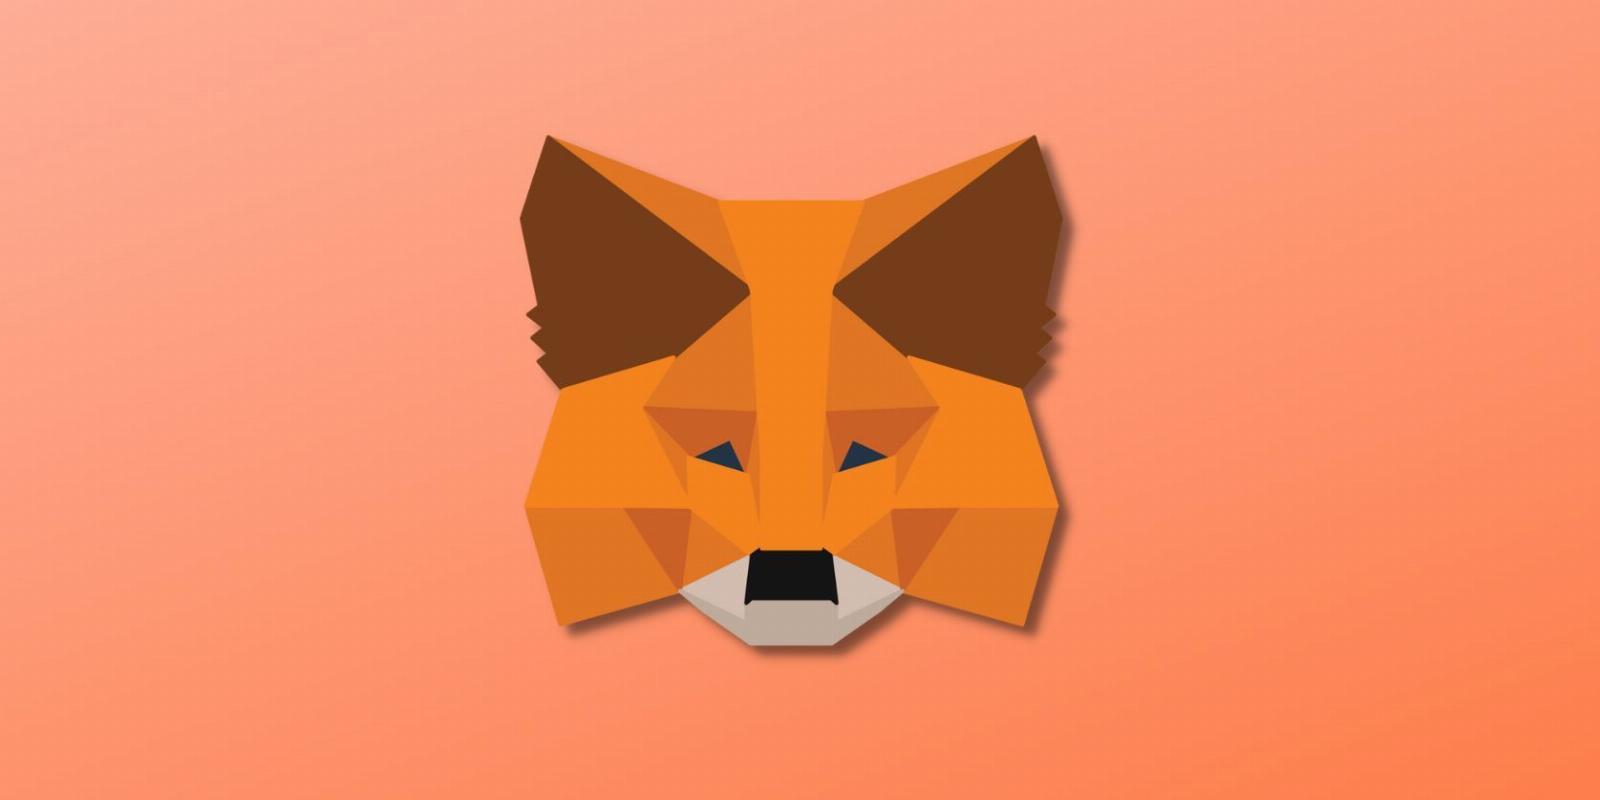 How to Navigate the MetaMask Mobile App